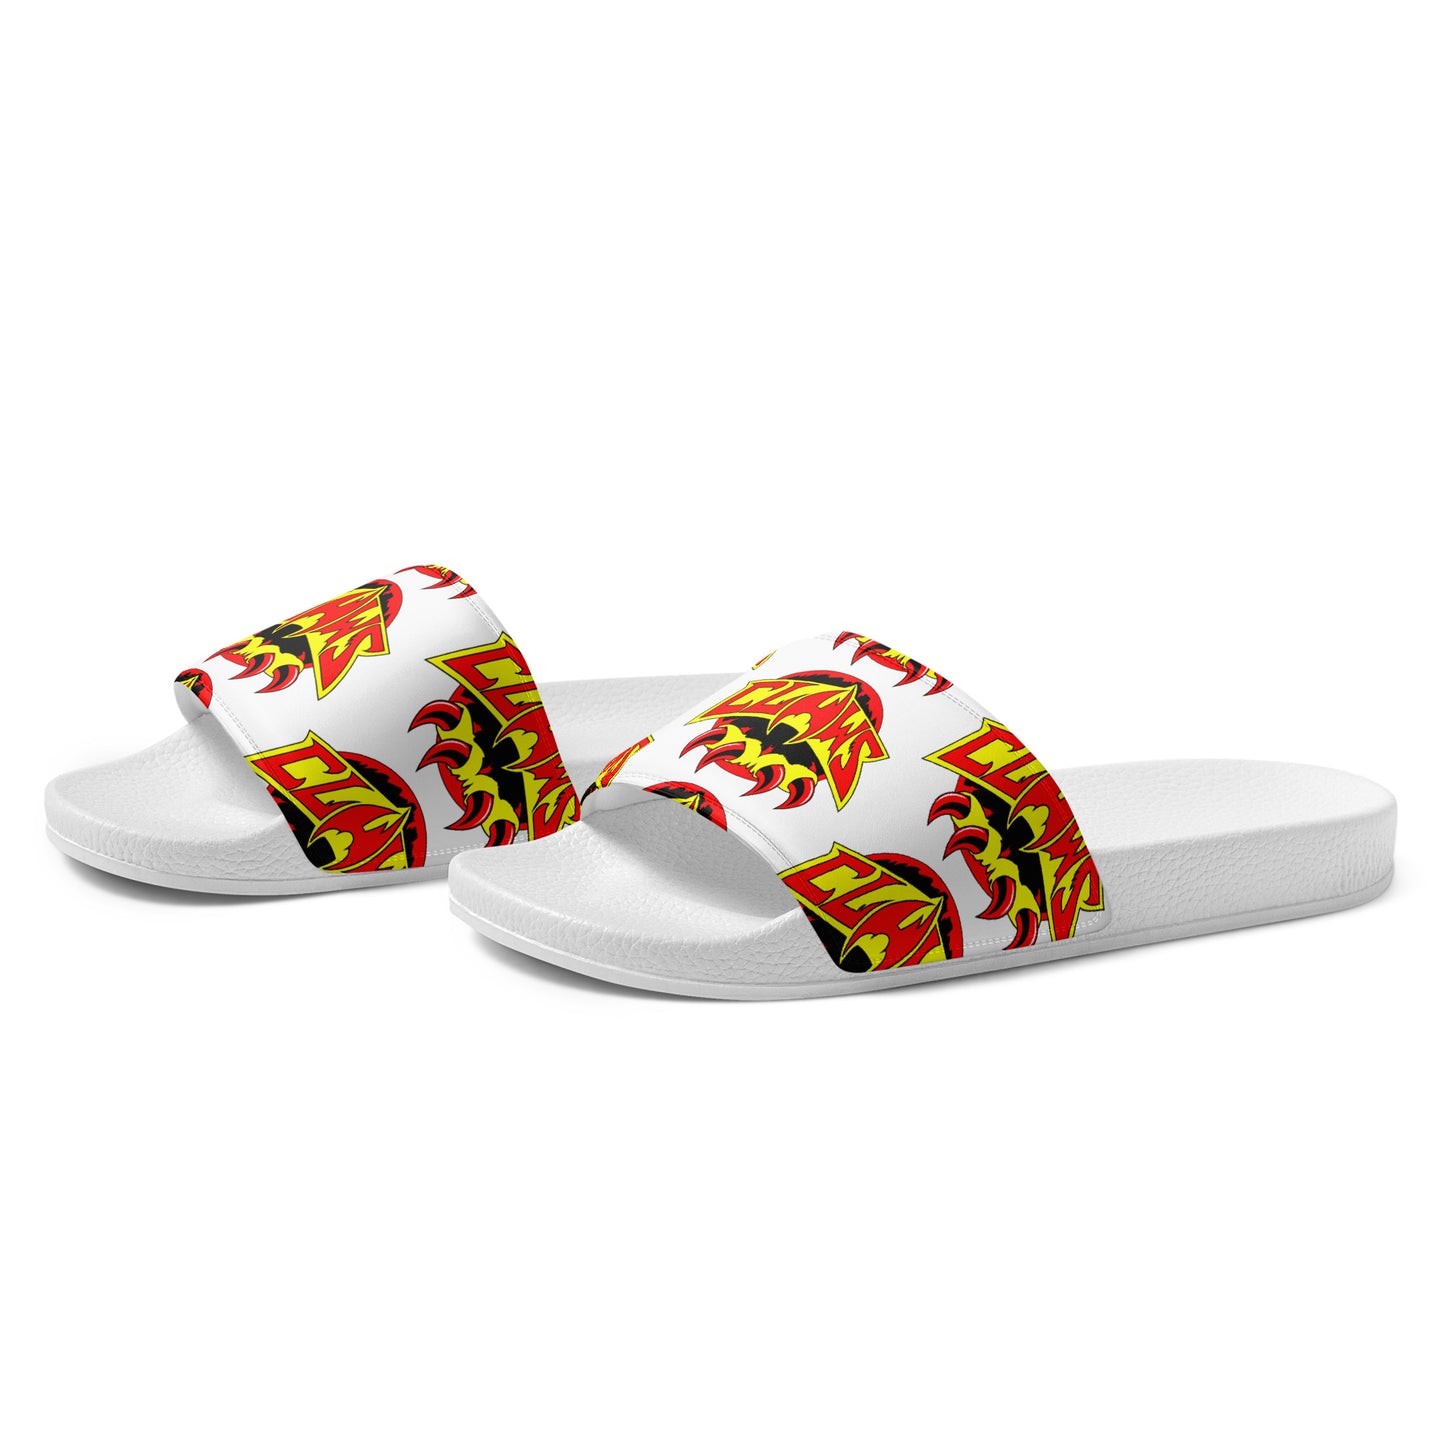 Zoo Jitsu Fighters CLAWS Logo Men’s slides - Icon Heroes 